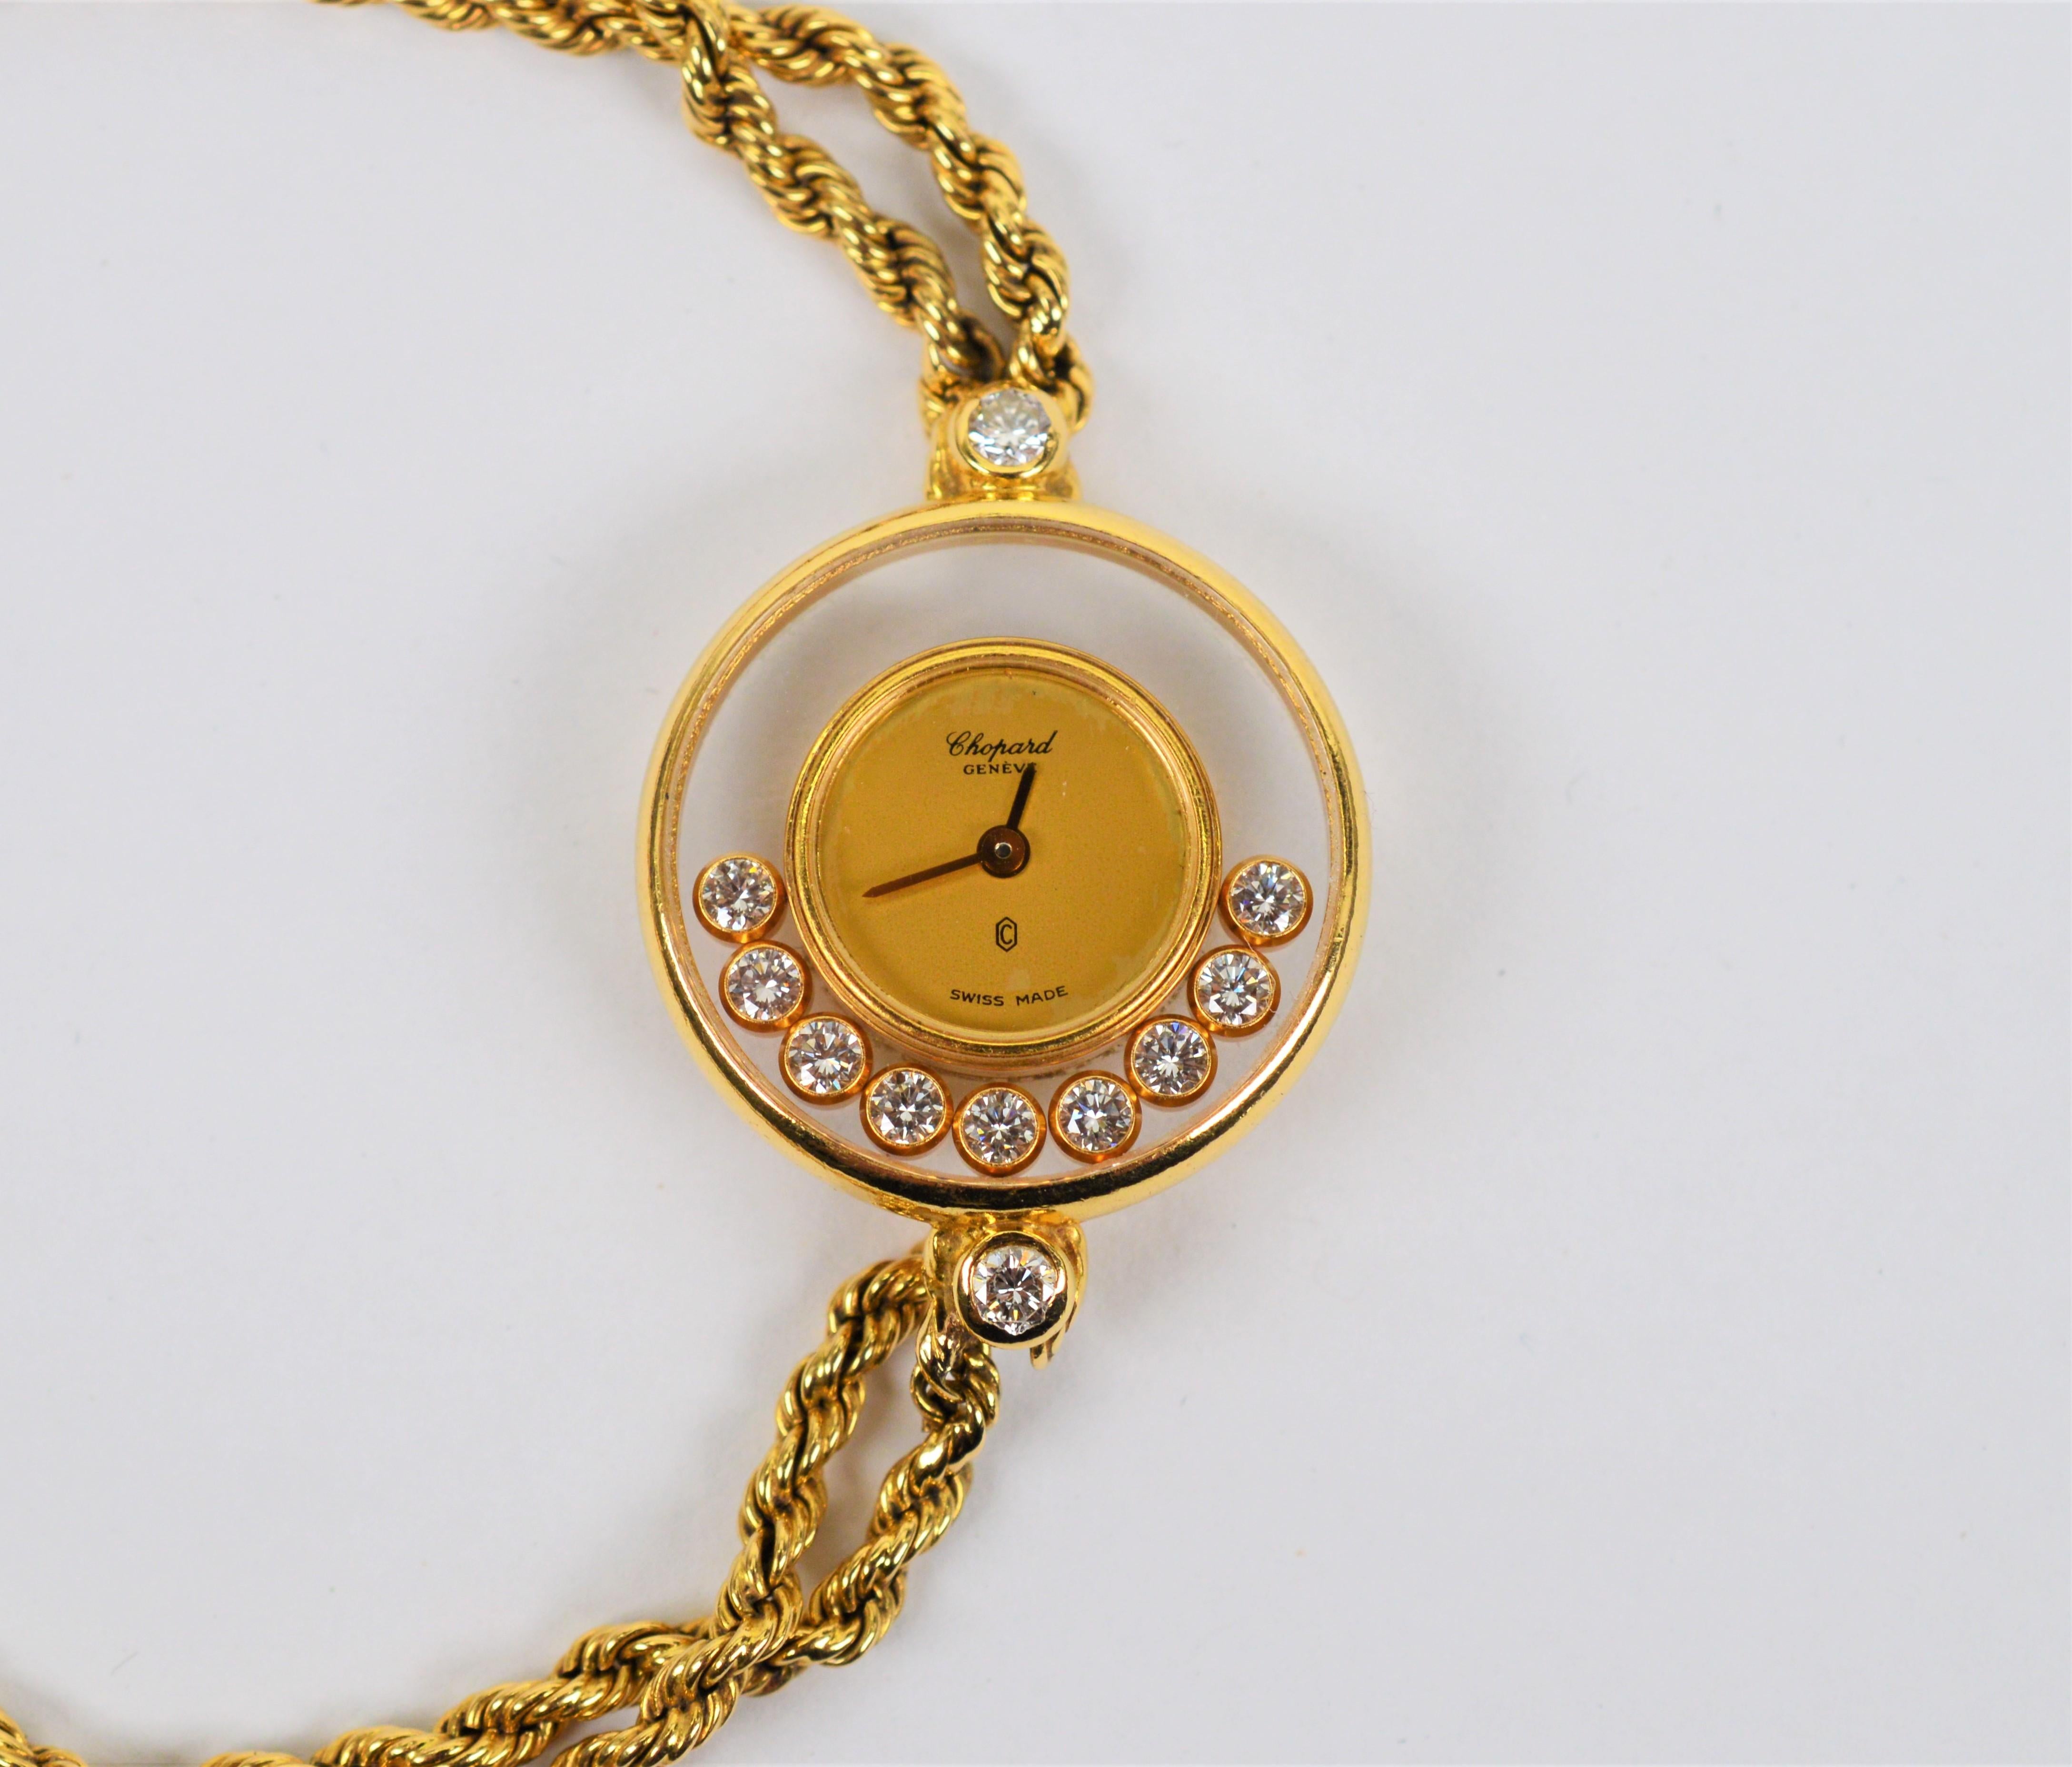 Enjoy the high style of this fine vintage Ladies Chopard Happy Diamonds 18 Karat Yellow Gold Bracelet Watch. Nine diamonds float under a round sapphire crystal dial enhanced by two diamond in the lugs. An 18 Karat yellow gold double rope bracelet